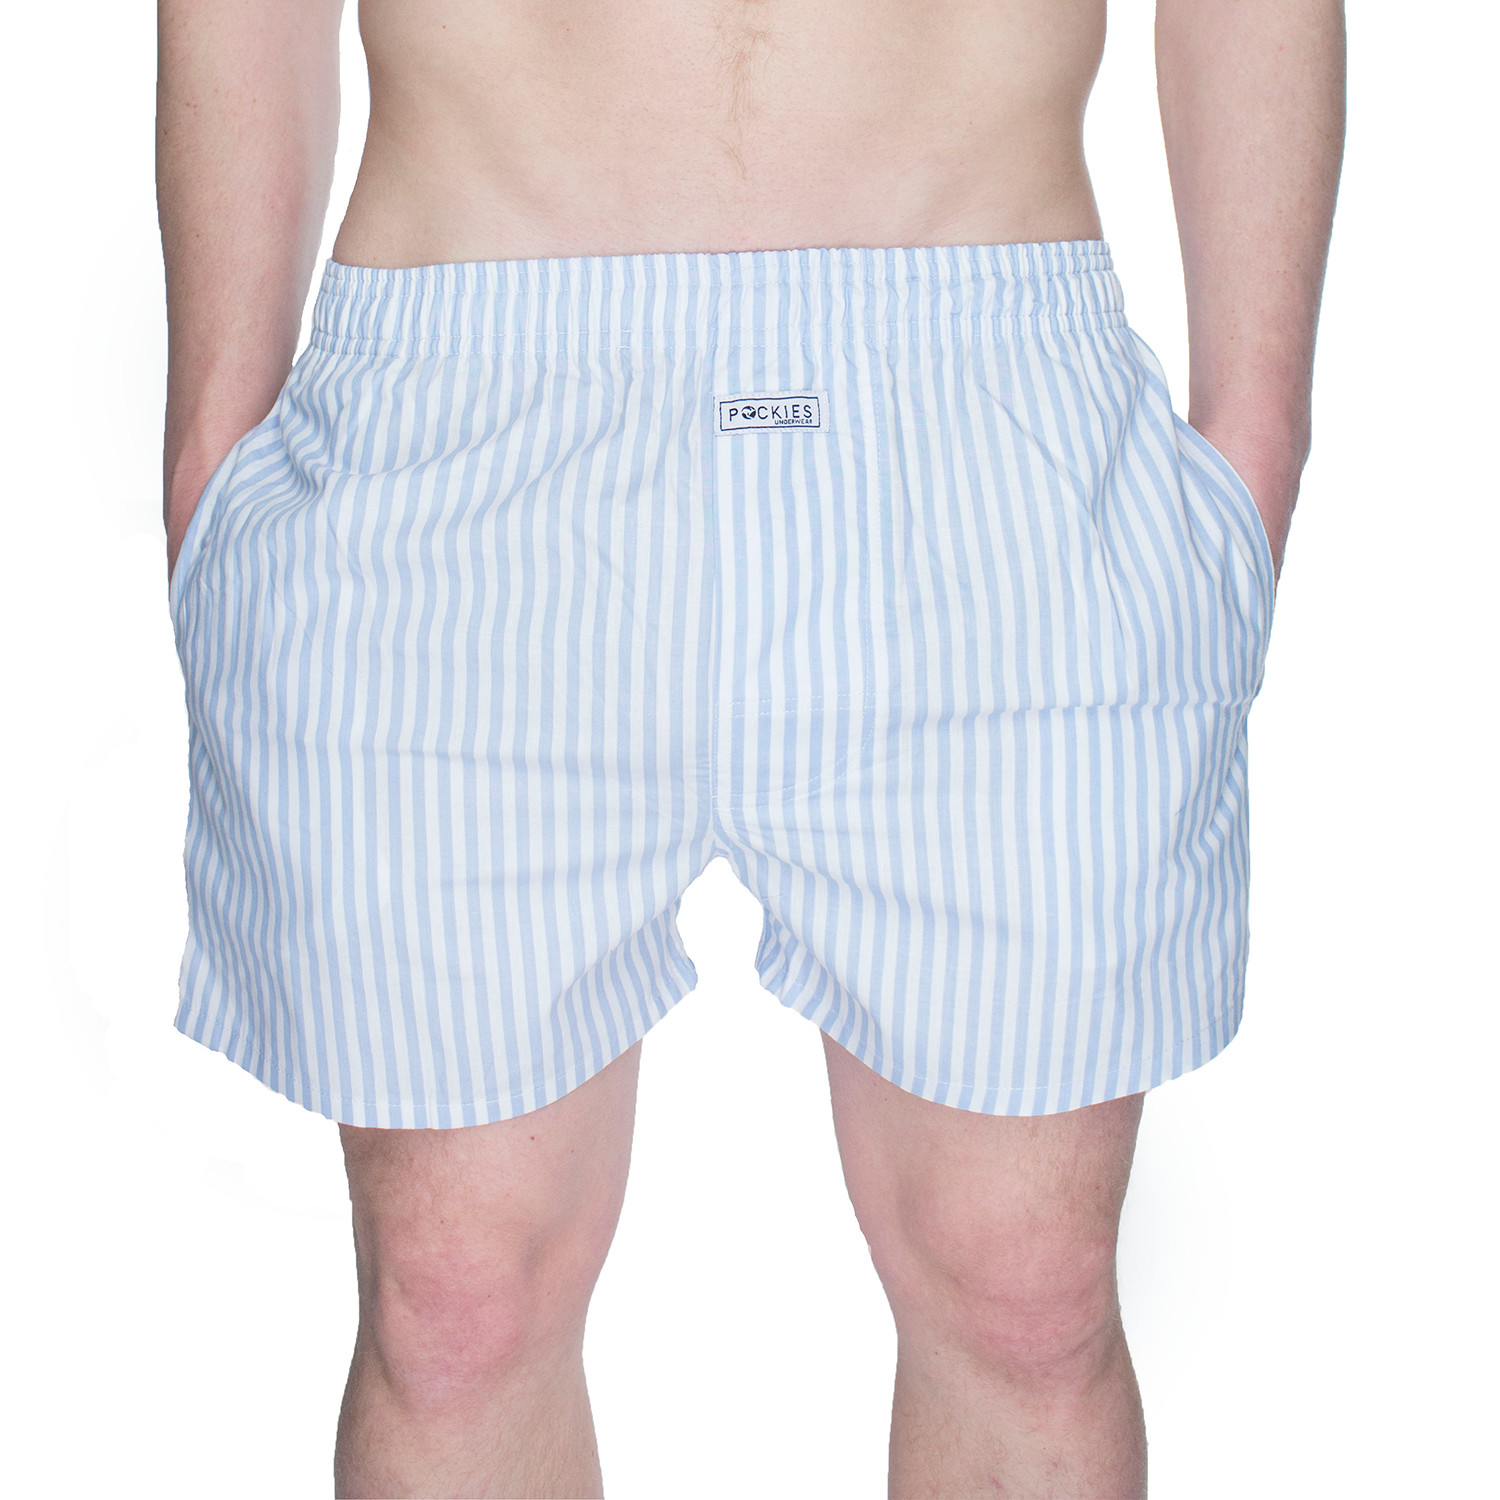 Baby Stripes Boxershorts // Blue (S) - Pockies - Touch of Modern